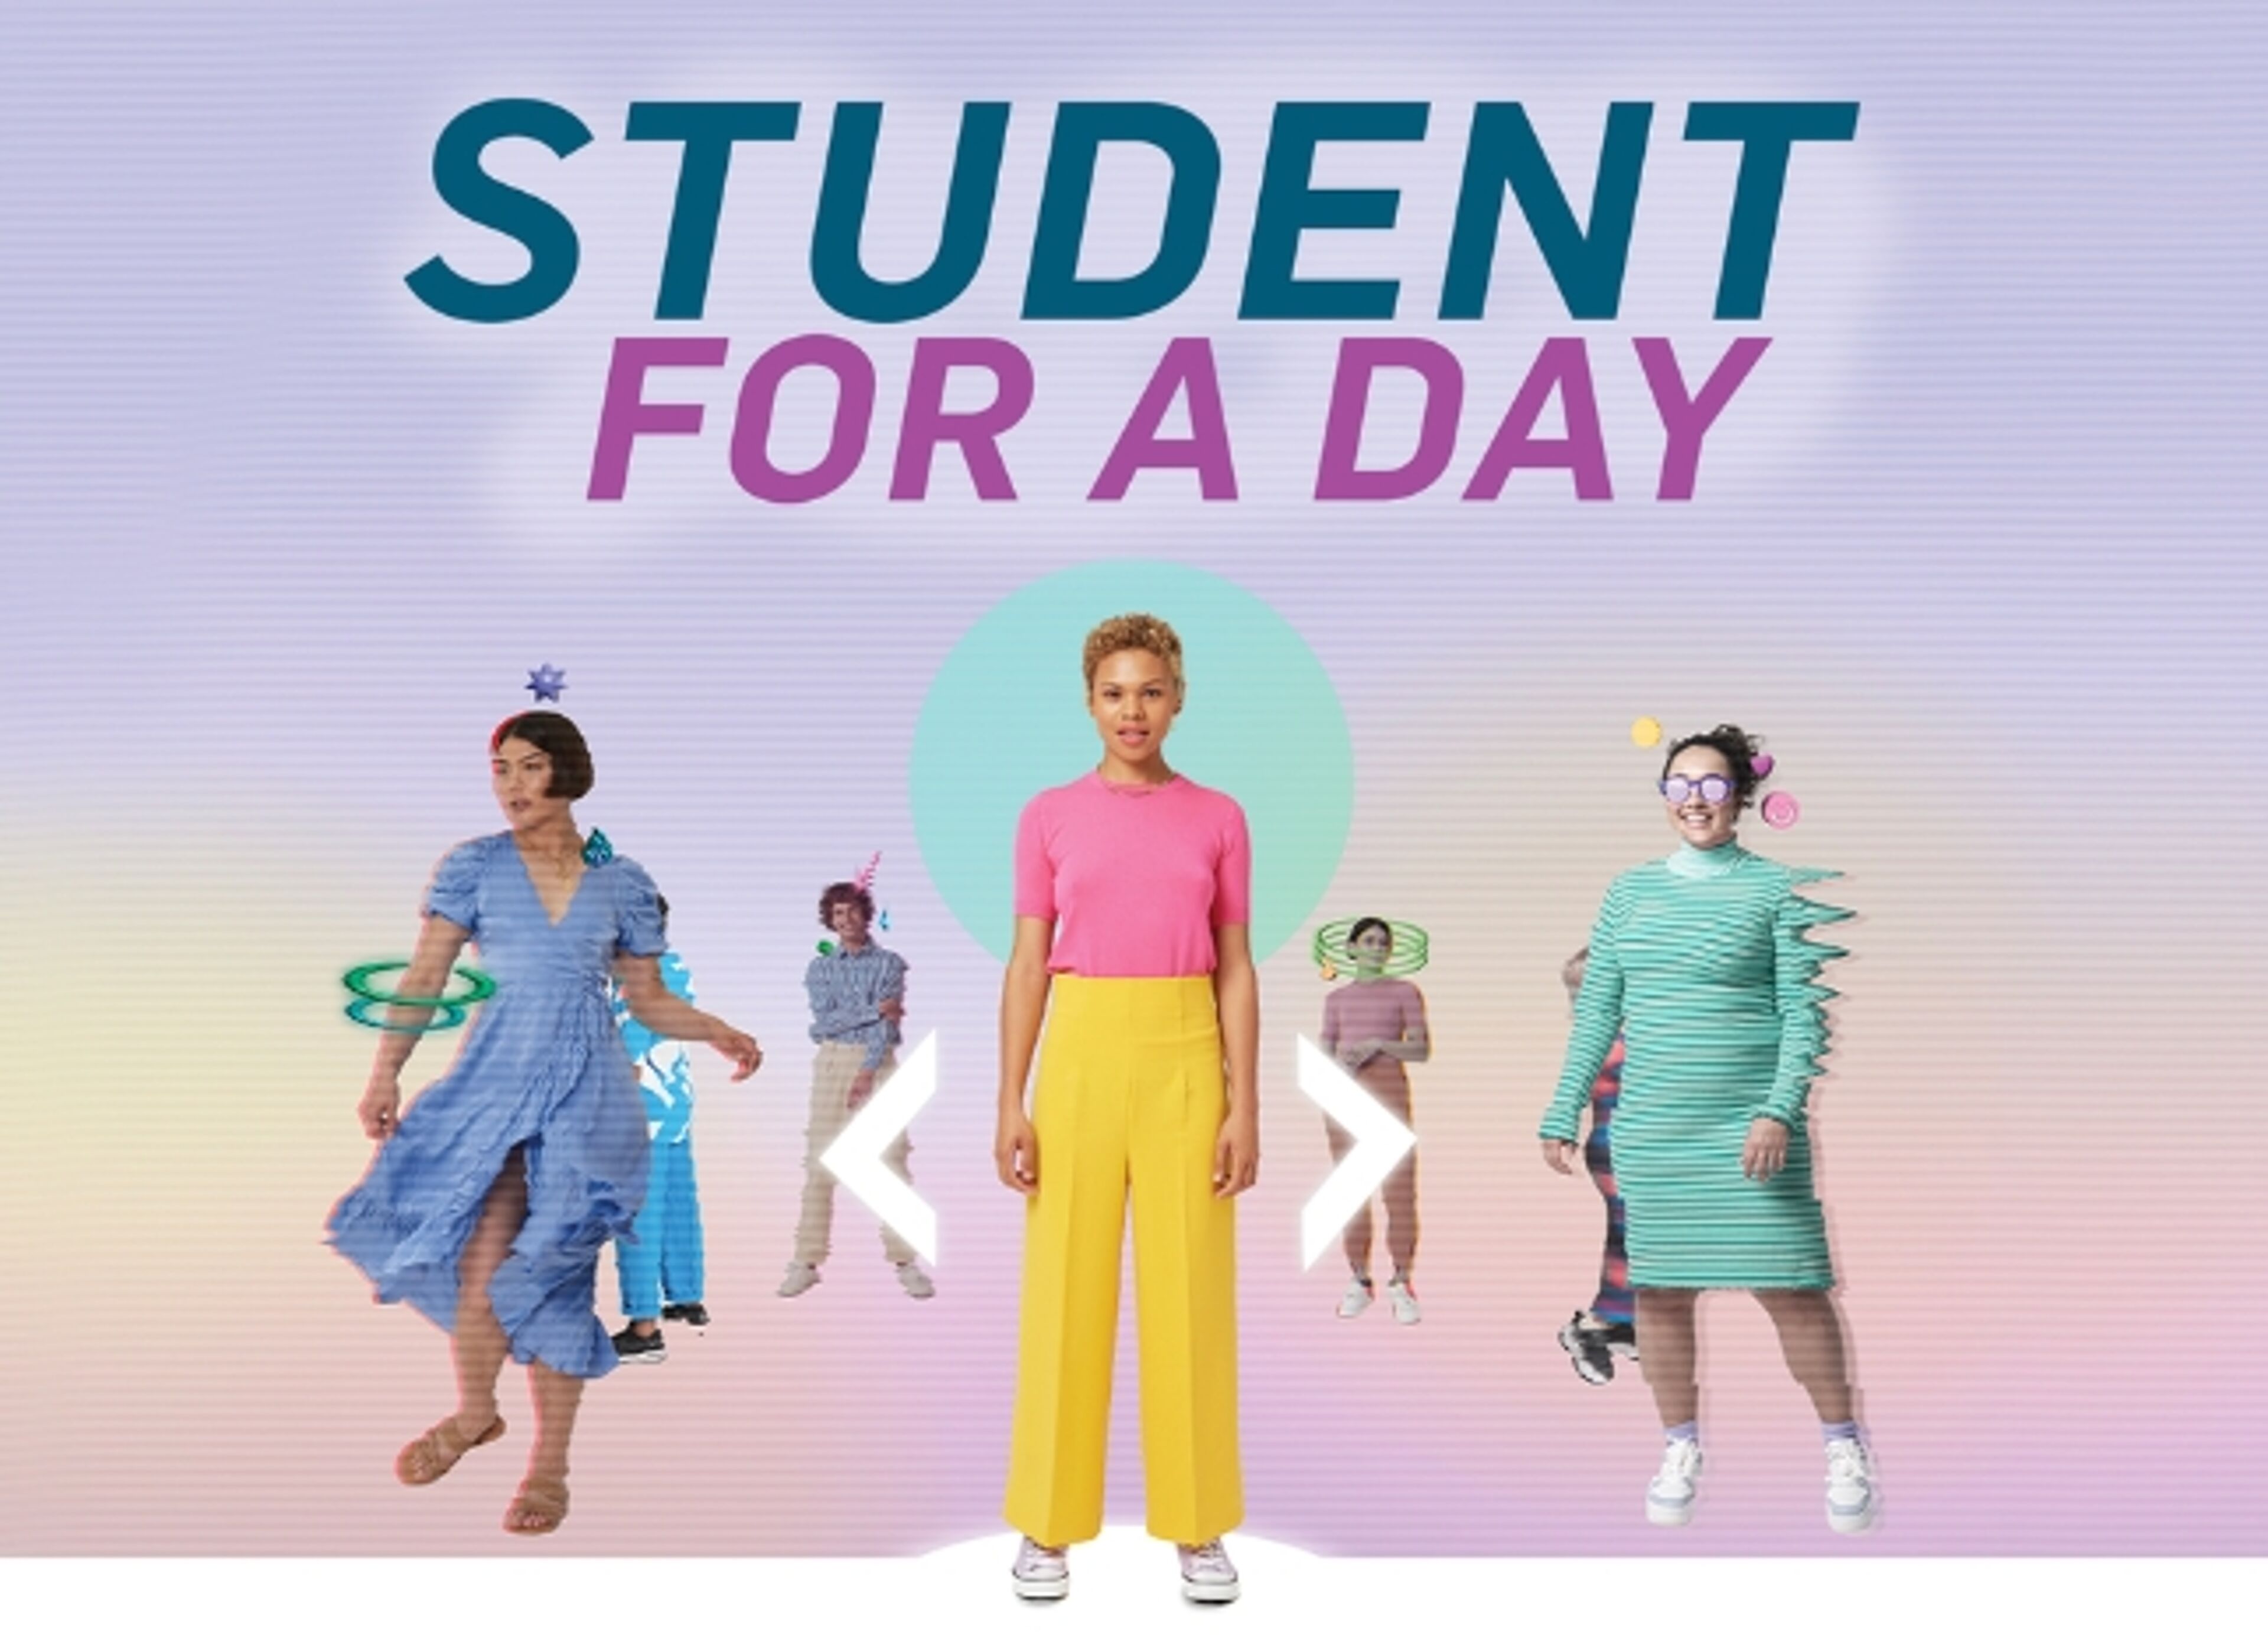 A promotional graphic titled "Student For A Day" showcasing diverse individuals in various outfits, representing different student archetypes.